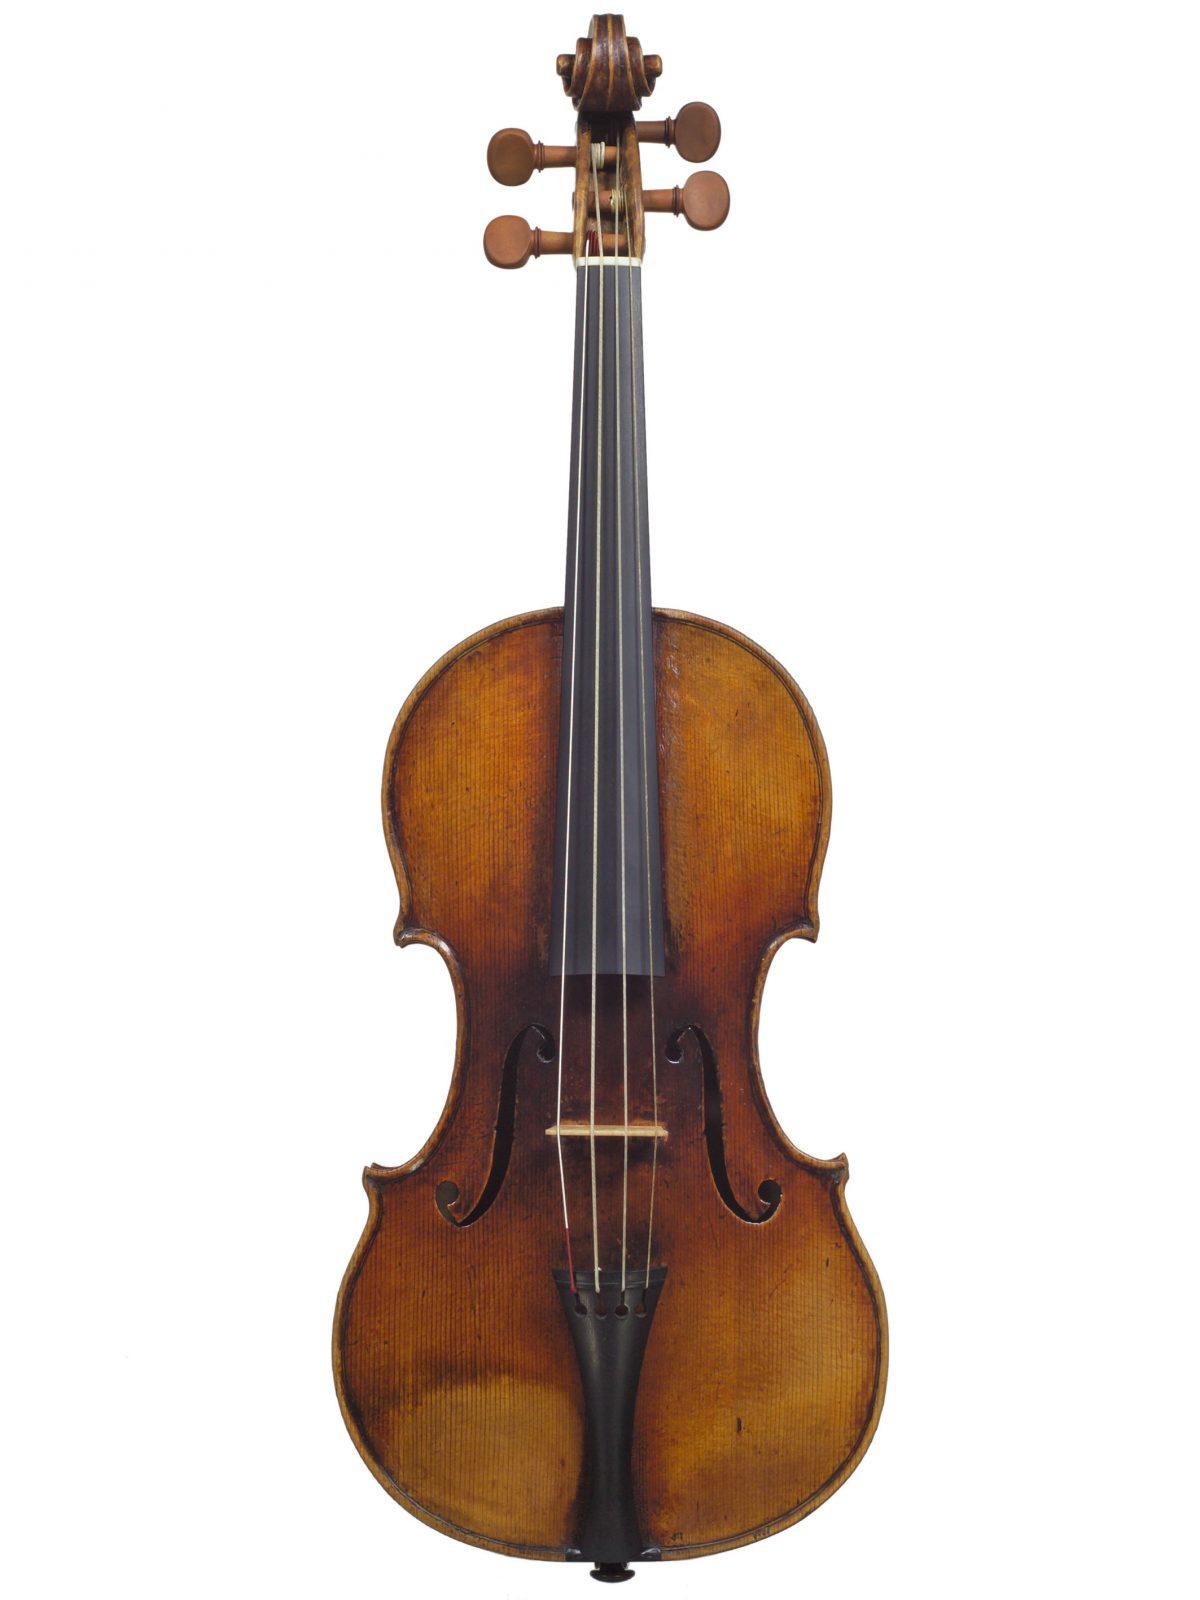 The full arch of the violin body, with the distinctive long f-holes on either side of the strings, give “Il Cannone” its strong, rich, and earthy sound. (The City of Genoa)